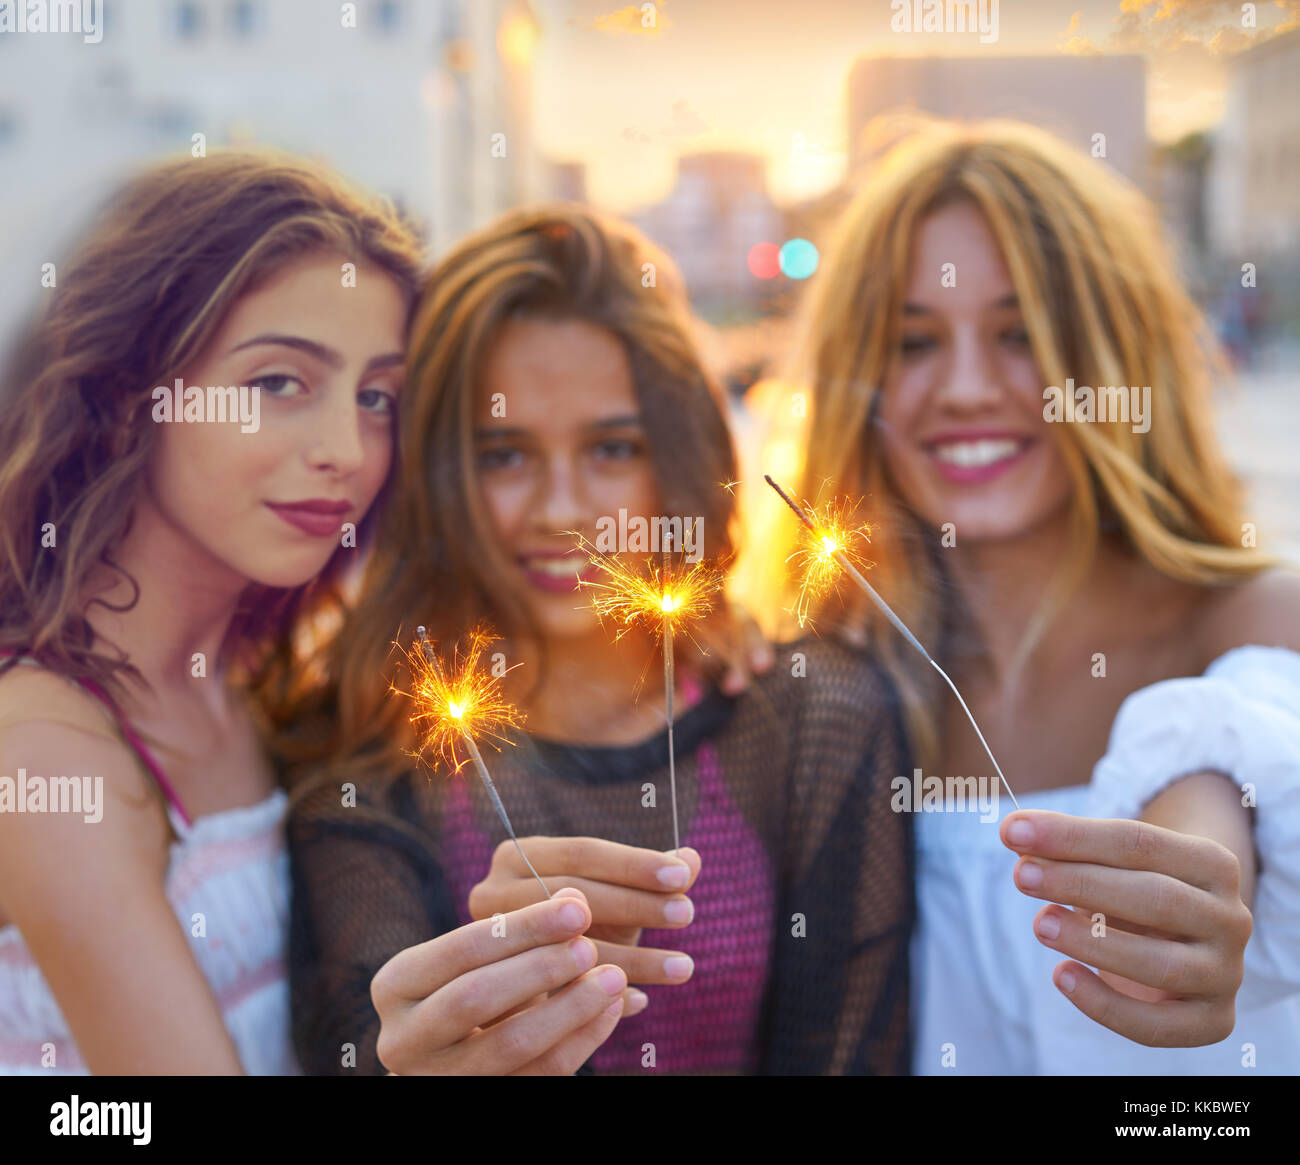 Best friends teen girls with sparklers at sunset in the city Stock Photo